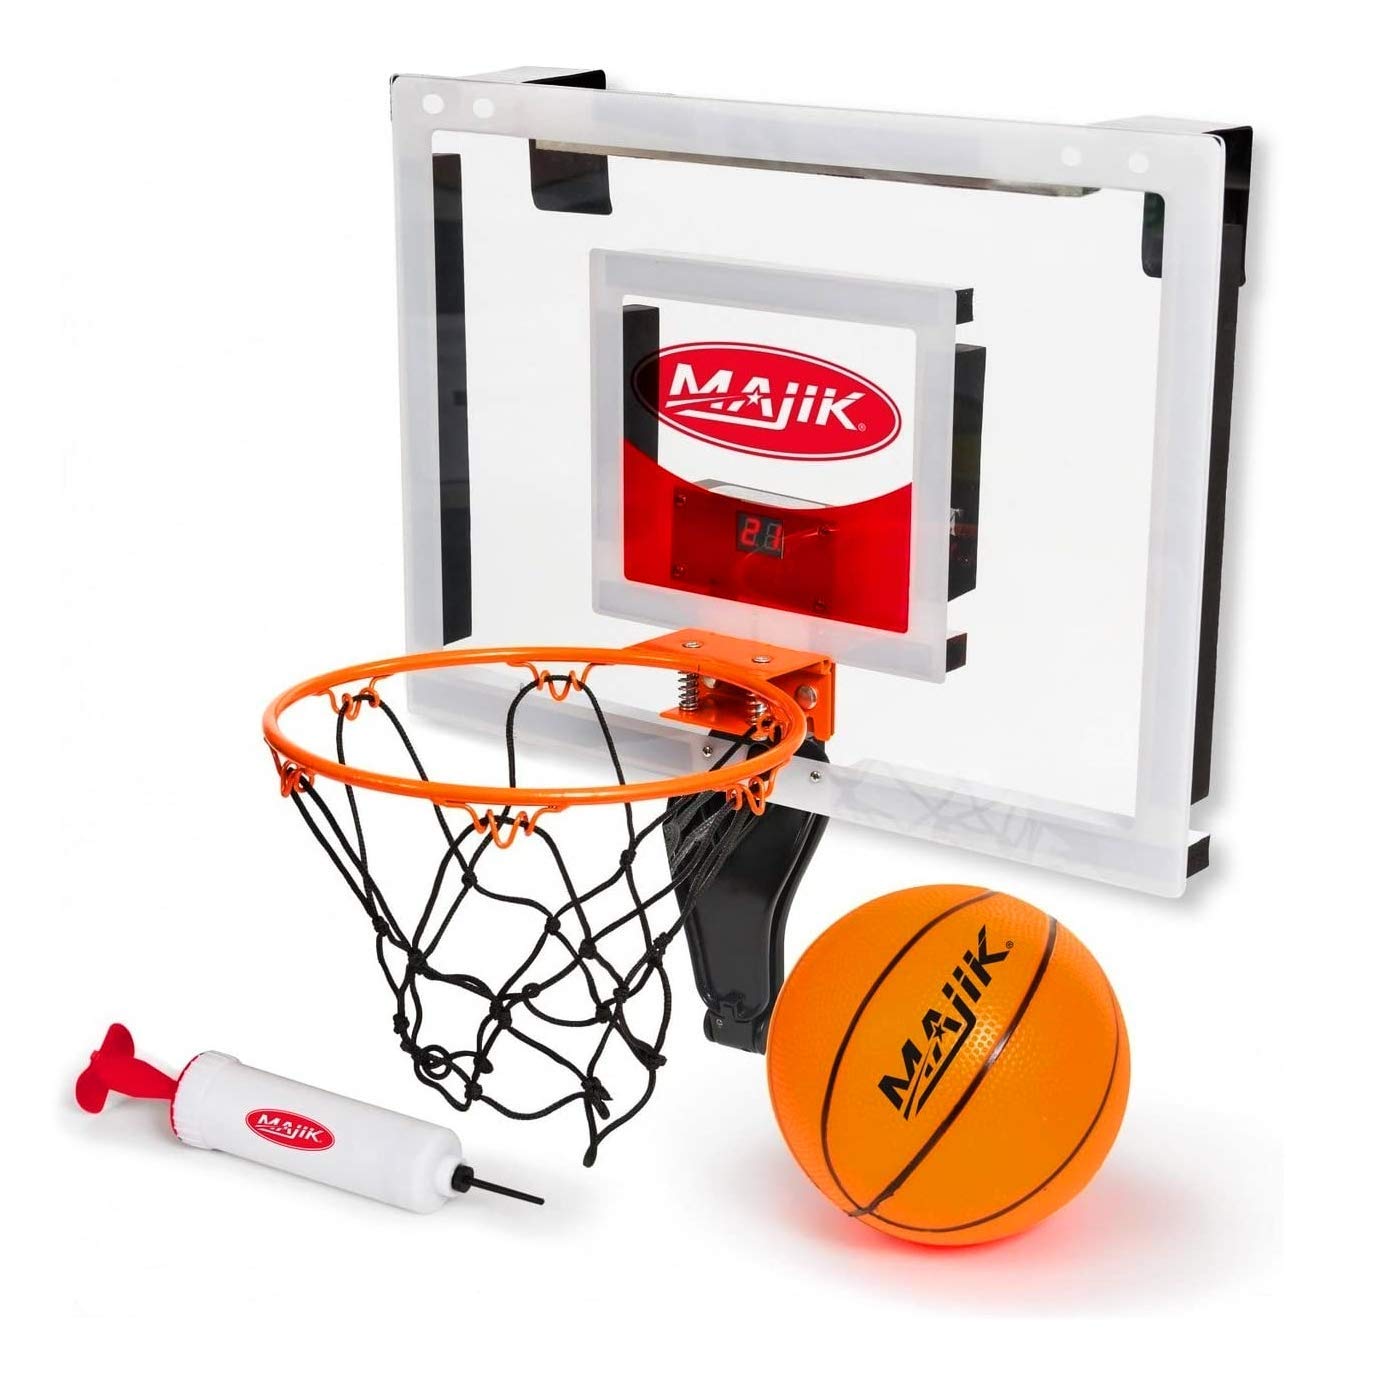 EastPoint Sports Majik Buzzer Beater Over the Door Mini Basketball Hoop for Indoor Basketball Play - Complete with Automatic LED Scoring, Pro-Style Basketball Backboard, Breakaway Rim, Ball & Air Pump